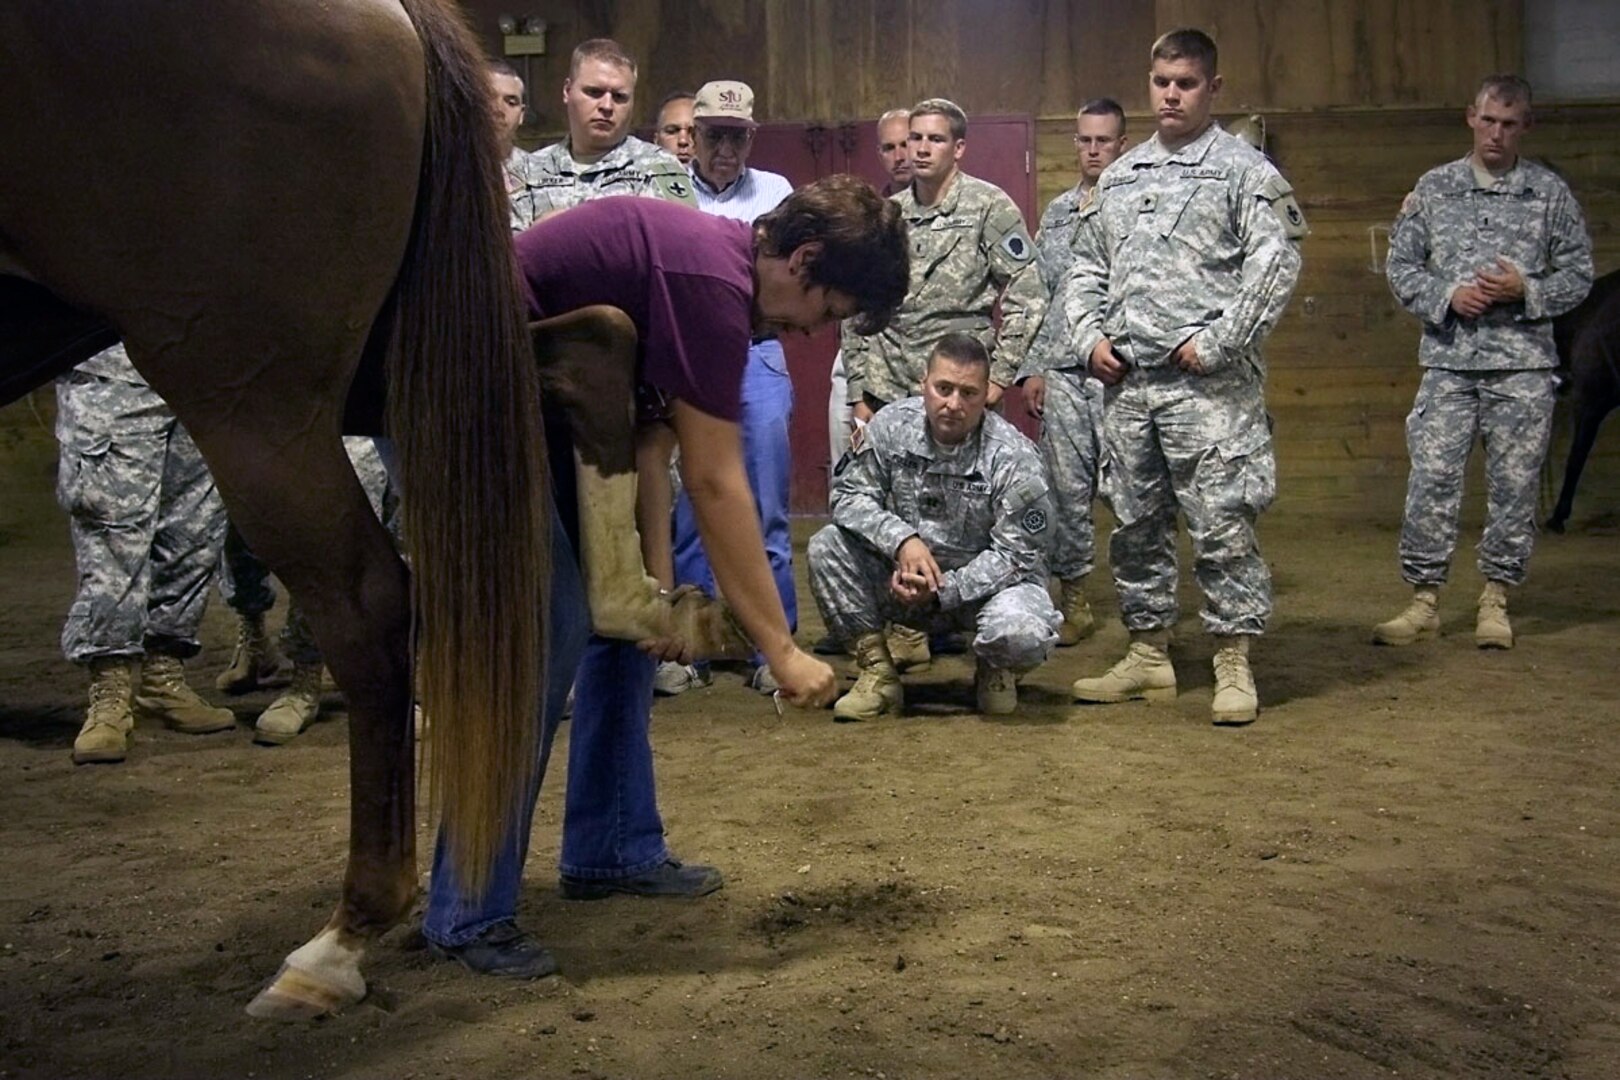 Sheryl King, director of equine studies at Southern Illinois University Carbondale, demonstrates the correct way to clean a horse's hoof to members of the Illinois National Guard's Agriculture Development Team. The team of agricultural specialists will deploy to Afghanistan in 2011 as part of a program to bring more modern agricultural practices to Afghanistan.